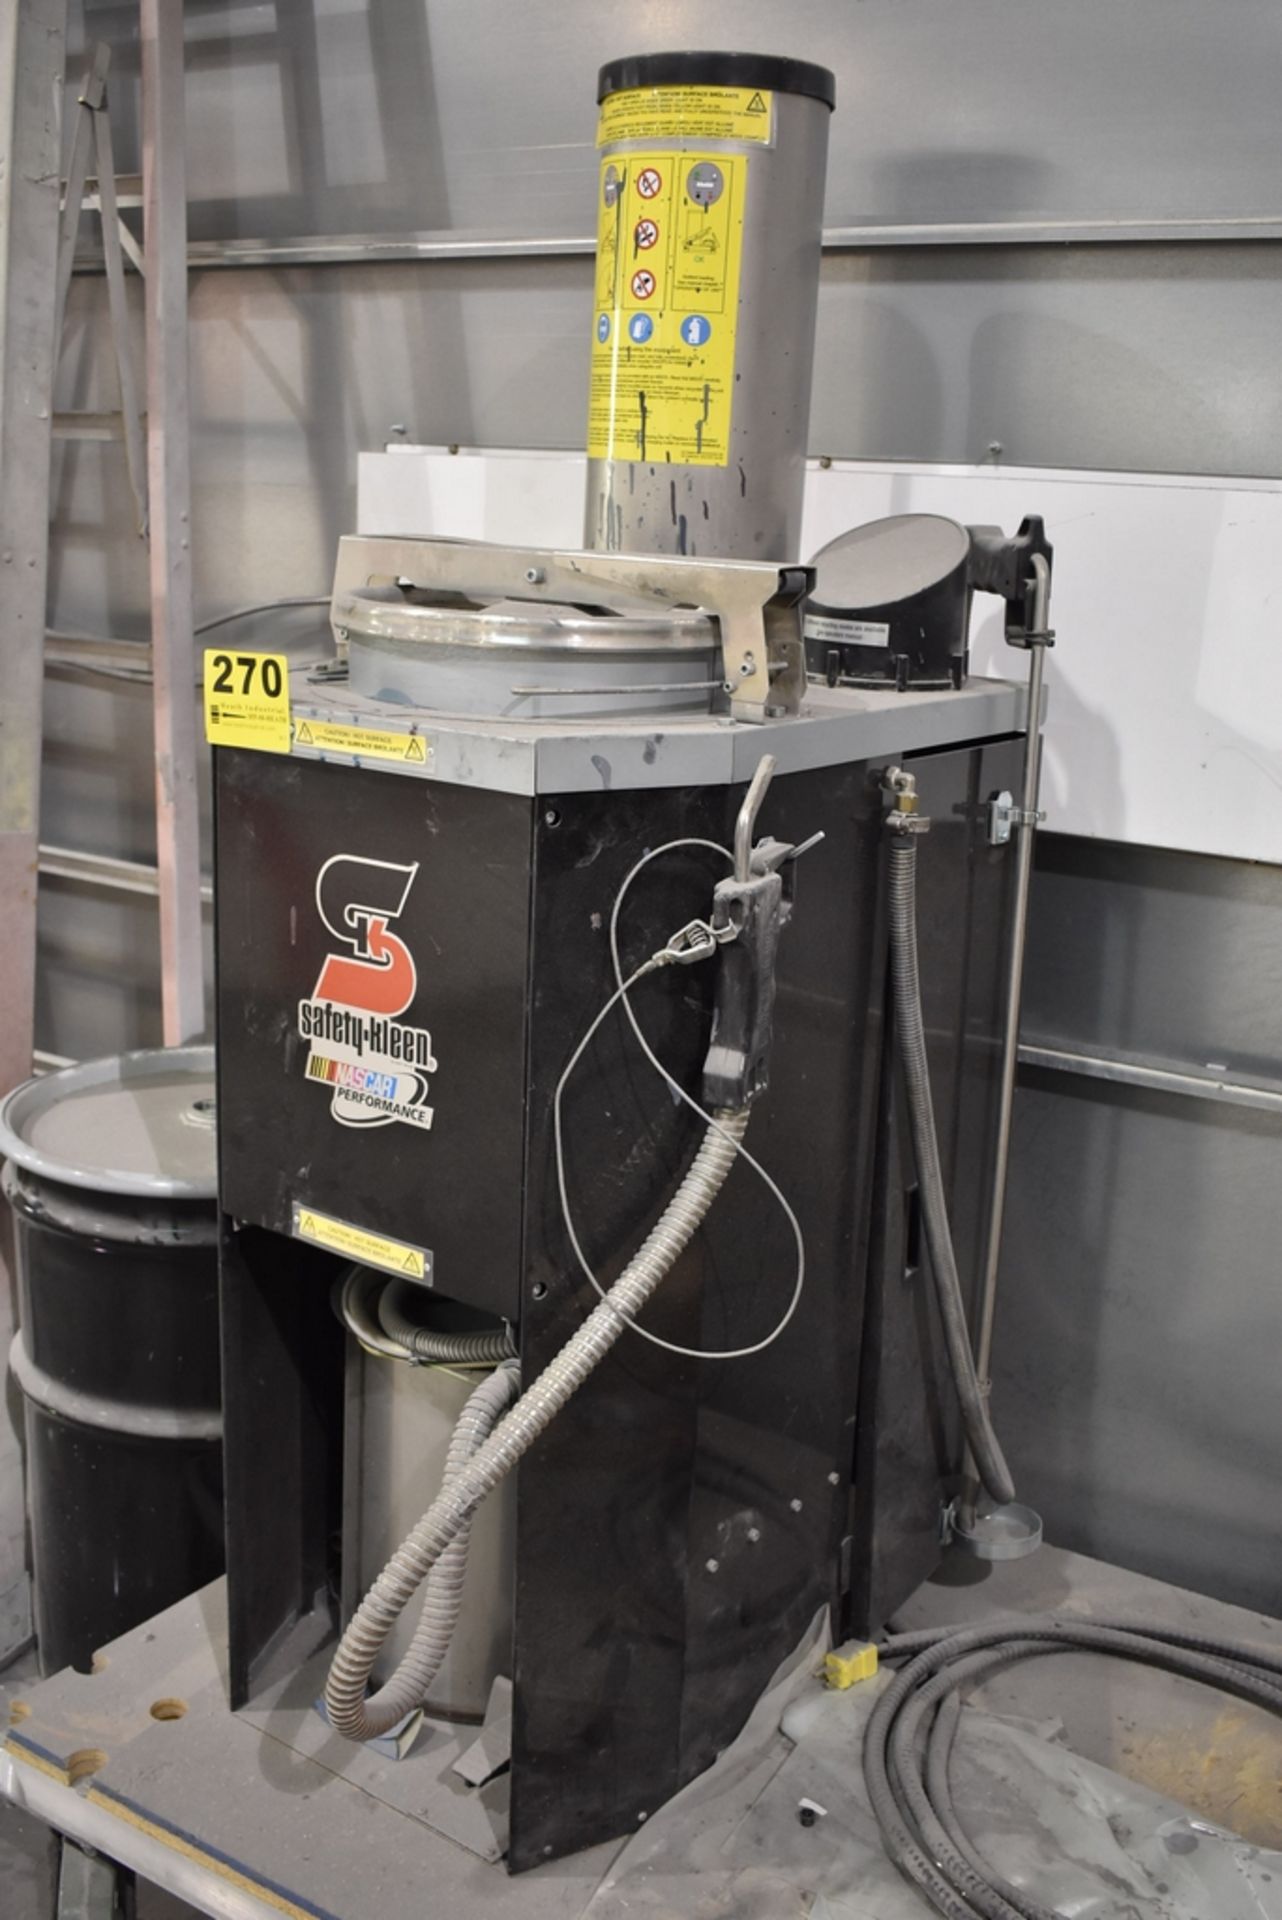 SAFETY KLEEN MODEL 710.3 MINIMIZER SOLVENT RECYCLER SYSTEM - Image 2 of 4